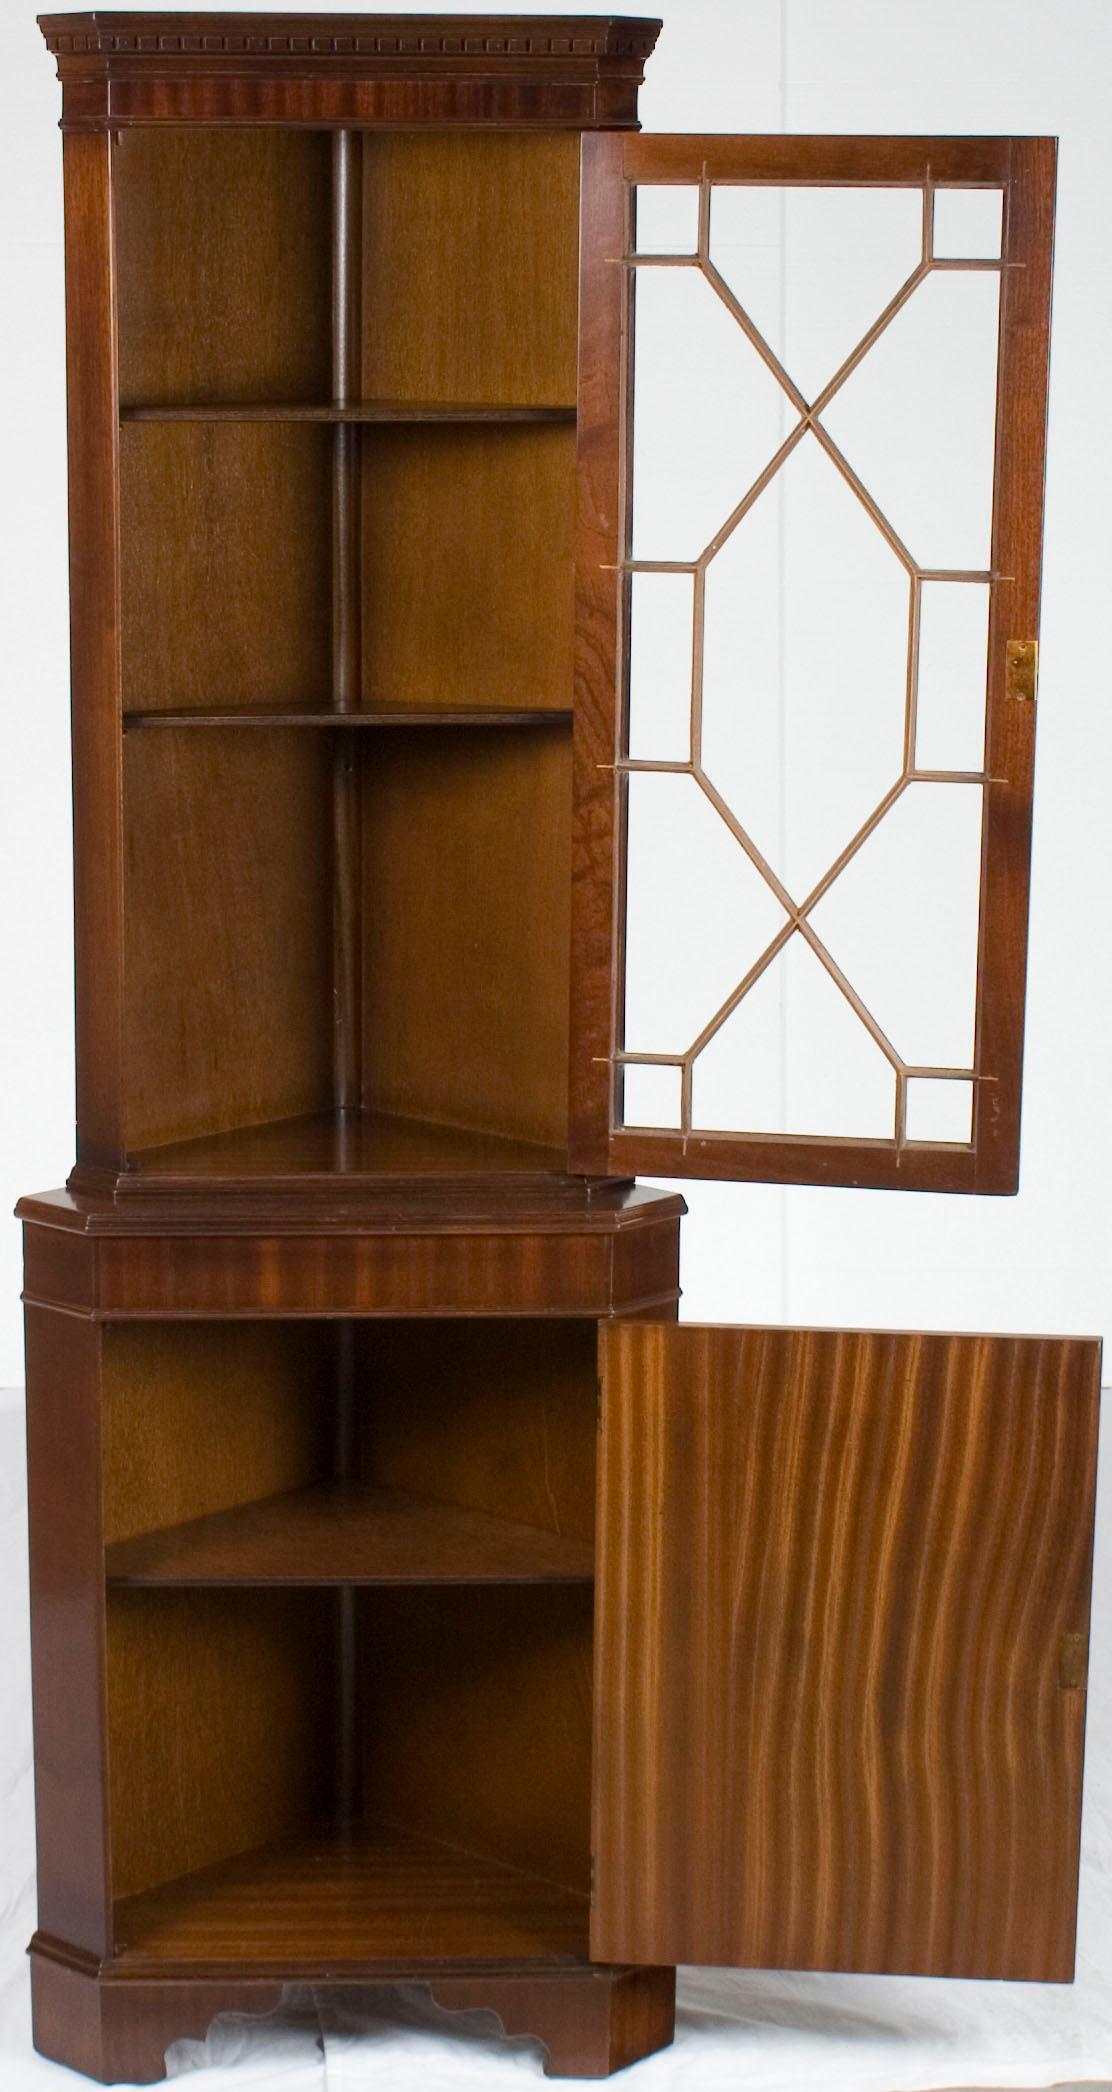 This lovely flame mahogany corner cabinet was crafted in England around the year 1960. Today, the mahogany looks as beautiful as ever, with a rich complexion and a fine grain. The upper cabinet door features elegant astragal glass and dental